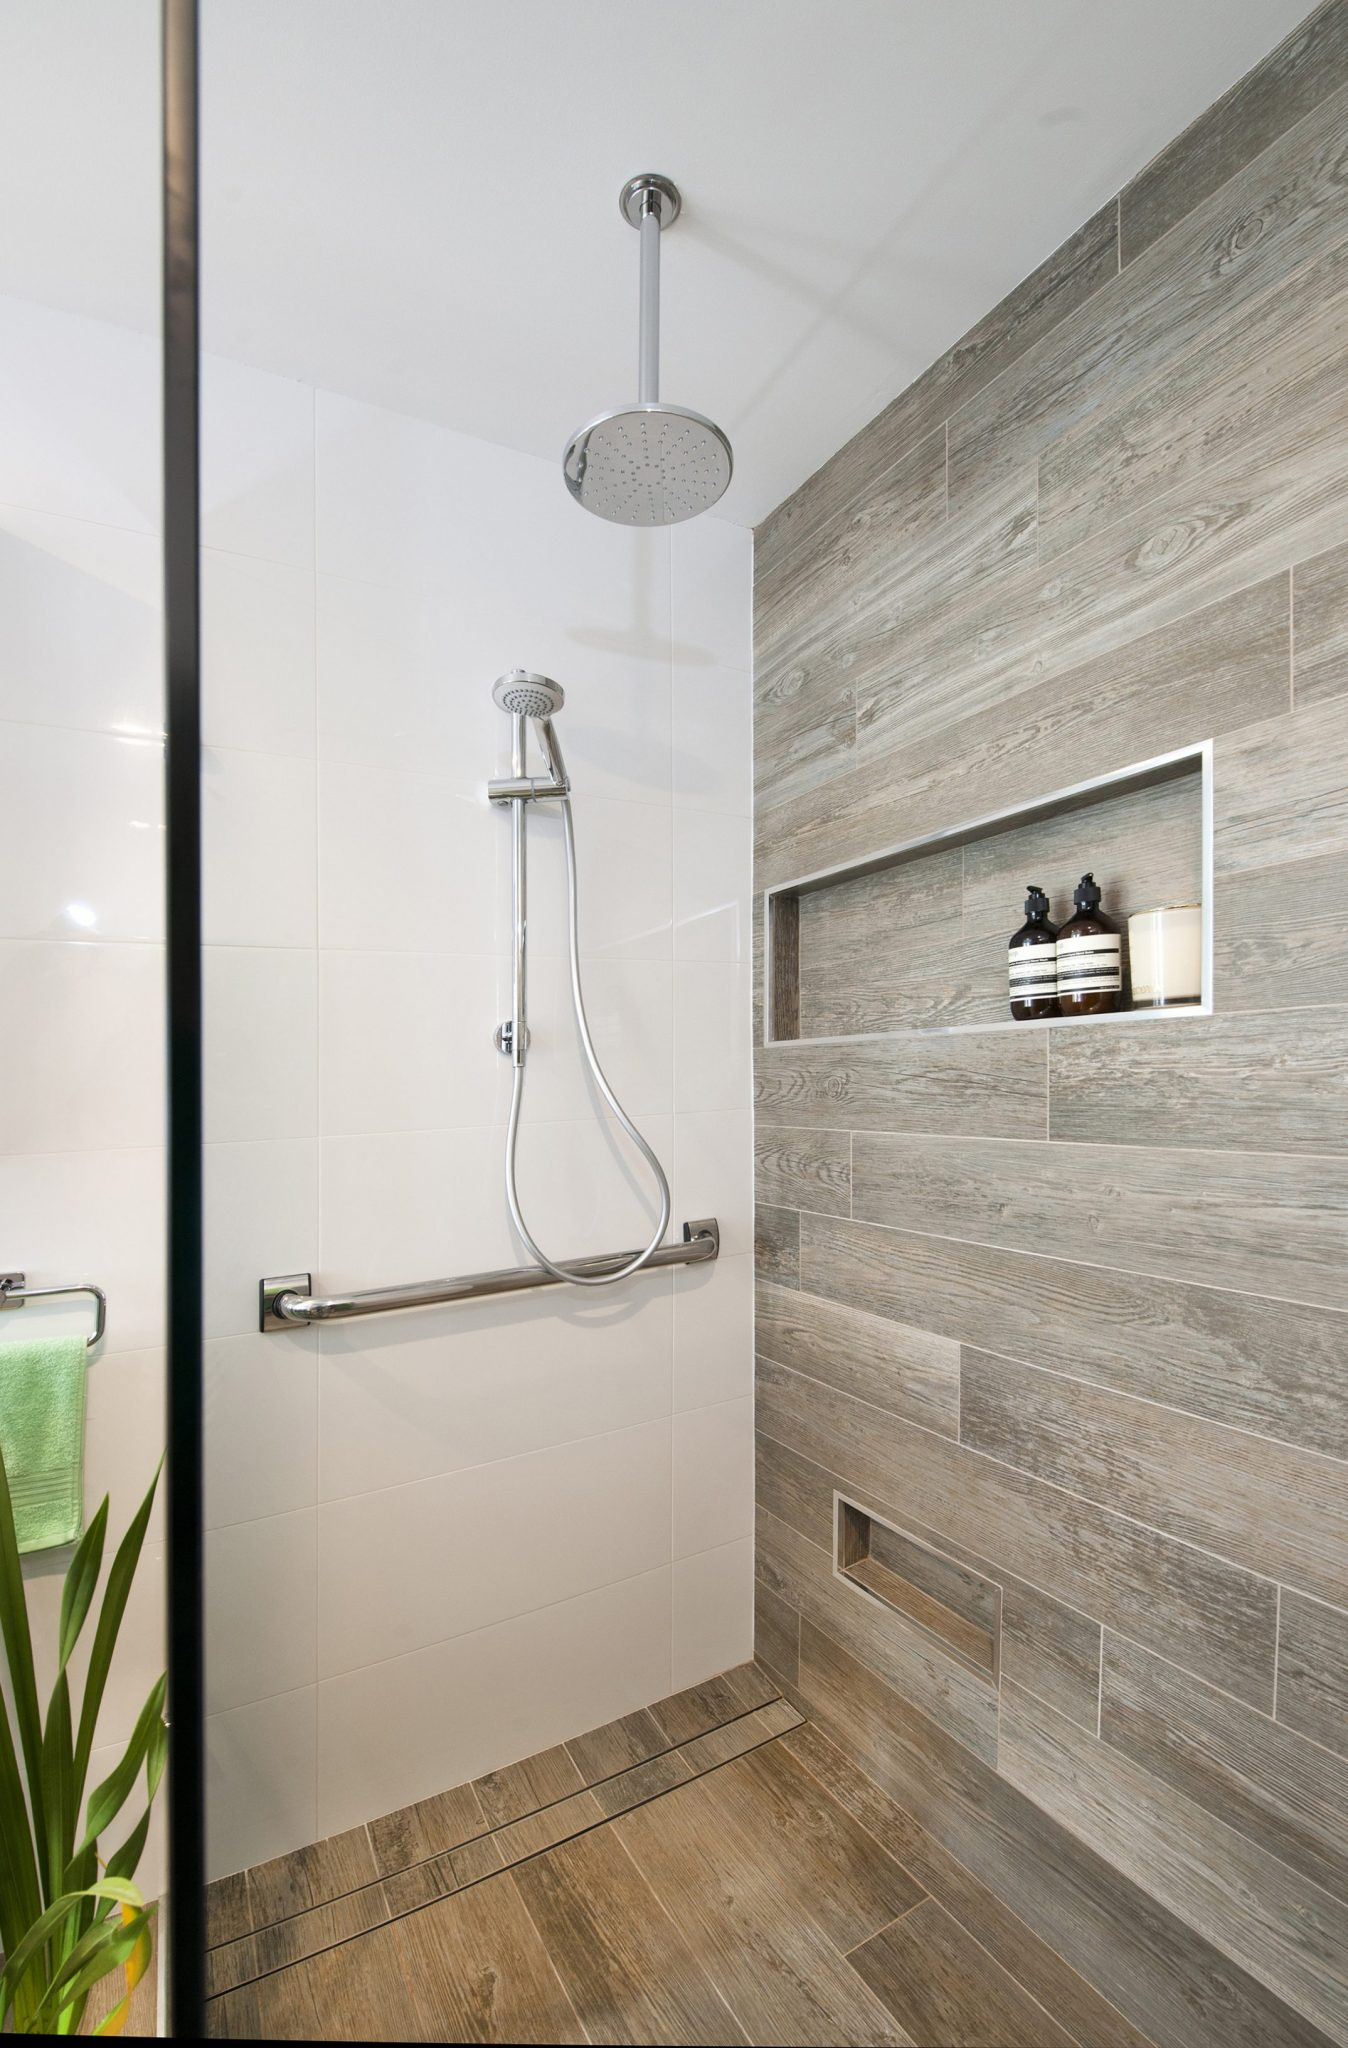 Bathroom Wall Tile
 Ore’s tips for selecting a bathroom feature wall – Life s